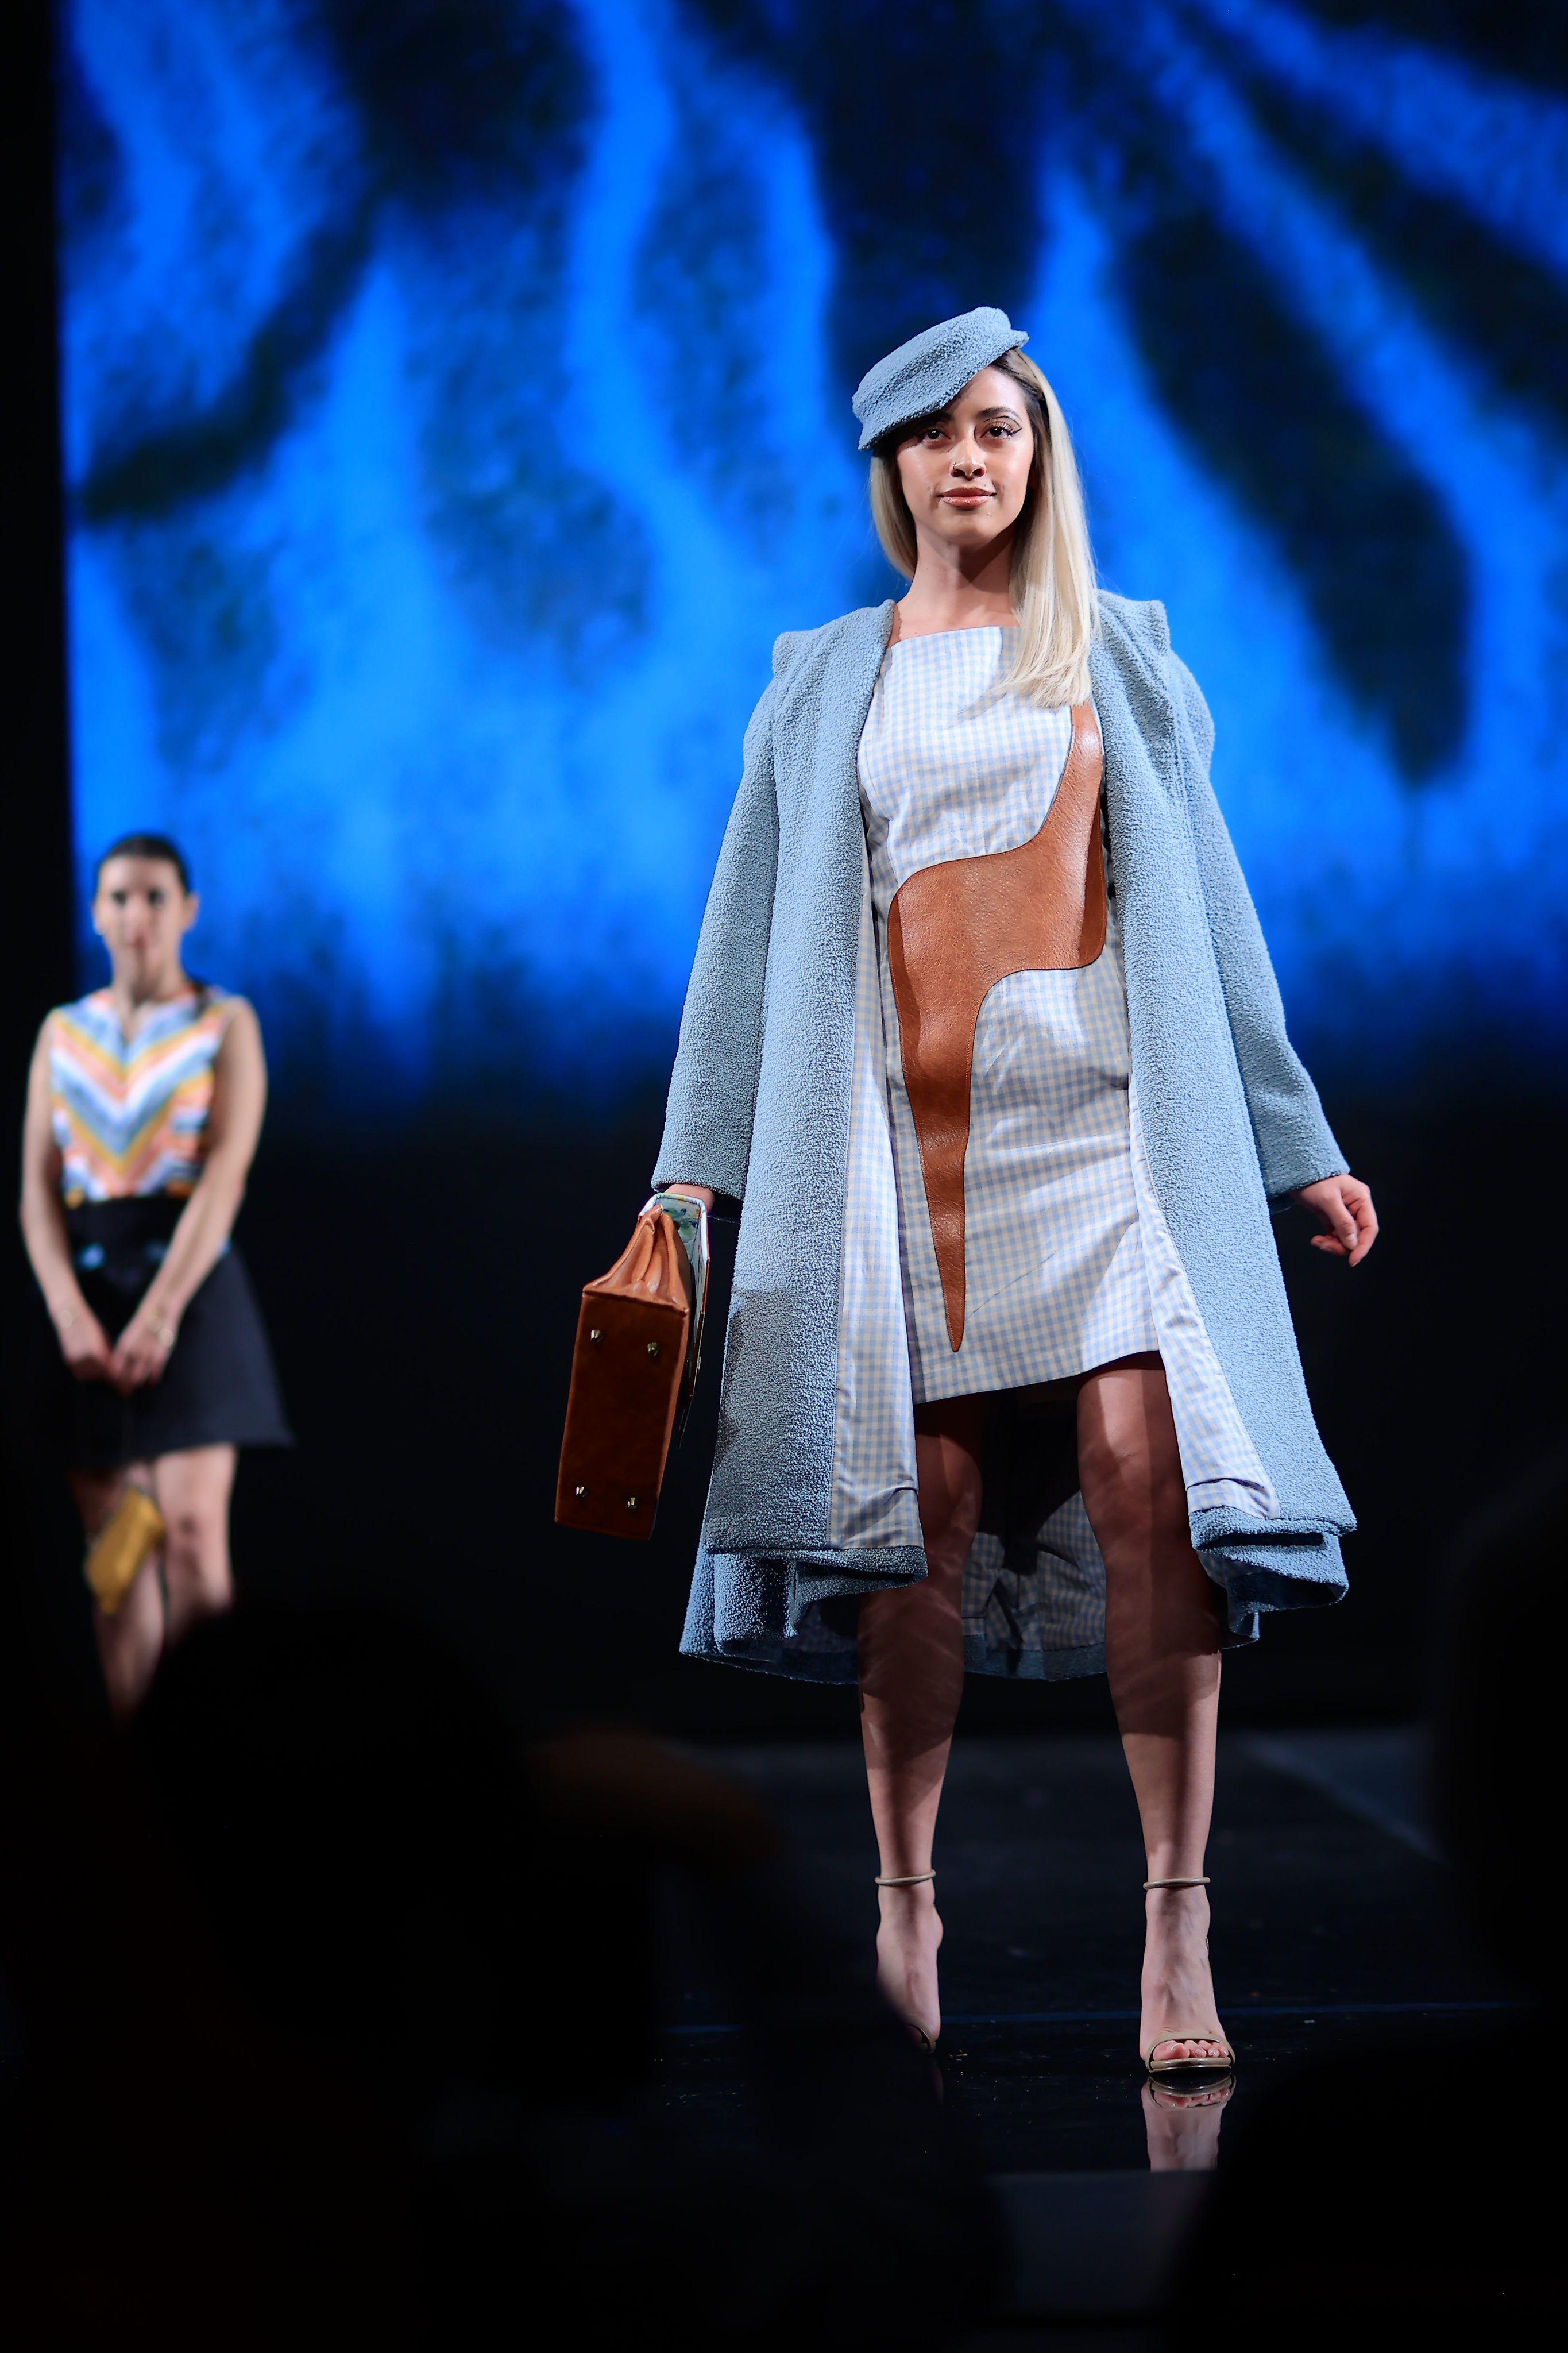 Model carrying a brown and blue purse, wearing a brown and blue patterned dress, a light blue peacoat, and a matching light blue hat.